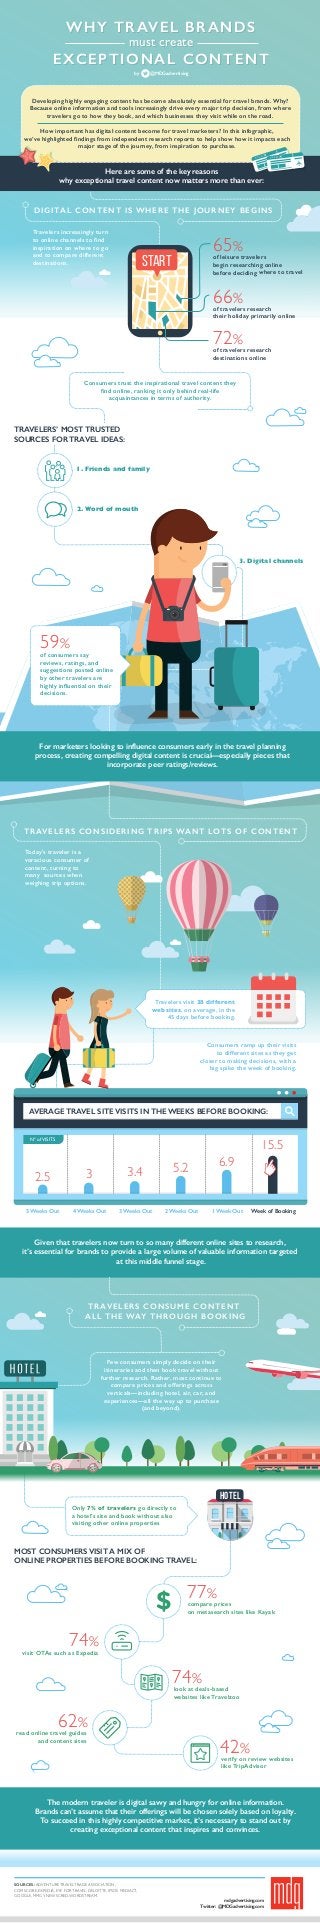 DIGITAL CONTENT IS WHERE THE JOURNEY BEGINS
Travelers increasingly turn
to online channels to find
inspiration on where to go
and to compare different
destinations.
of travelers research
destinations online
of travelers research
their holiday primarily online
Consumers trust the inspirational travel content they
find online, ranking it only behind real-life
acquaintances in terms of authority.
TRAVELERS’ MOST TRUSTED
SOURCES FOR TRAVEL IDEAS:
1. Friends and family
2. Word of mouth
Developing highly engaging content has become absolutely essential for travel brands. Why?
Because online information and tools increasingly drive every major trip decision, from where
travelers go to how they book, and which businesses they visit while on the road.
How important has digital content become for travel marketers? In this infographic,
we’ve highlighted findings from independent research reports to help show how it impacts each
major stage of the journey, from inspiration to purchase.
3. Digital channels
TRAVELERS CONSIDERING TRIPS WANT LOTS OF CONTENT
Today's traveler is a
voracious consumer of
content, turning to
many sources when
weighing trip options.
Given that travelers now turn to so many different online sites to research,
it’s essential for brands to provide a large volume of valuable information targeted
at this middle funnel stage.
TRAVELERS CONSUME CONTENT
ALL THE WAY THROUGH BOOKING
Few consumers simply decide on their
itineraries and then book travel without
further research. Rather, most continue to
compare prices and offerings across
verticals—including hotel, air, car, and
experiences—all the way up to purchase
(and beyond).
Only 7% of travelers go directly to
a hotel’s site and book without also
visiting other online properties
MOST CONSUMERS VISIT A MIX OF
ONLINE PROPERTIES BEFORE BOOKING TRAVEL:
compare prices
on metasearch sites like Kayak
visit OTAs such as Expedia
The modern traveler is digital savvy and hungry for online information.
Brands can’t assume that their offerings will be chosen solely based on loyalty.
To succeed in this highly competitive market, it’s necessary to stand out by
creating exceptional content that inspires and convinces.
SOURCES: ADVENTURETRAVELTRADE ASSOCIATION,
COMSCORE, EXPEDIA, EYE FORTRAVEL, DELOITTE, IPSOS MEDIACT,
GOOGLE, MMGY, NEWSCRED,WORDSTREAM.
WHY TRAVEL BRANDSWHY TRAVEL BRANDS
must createmust create
EXCEPTIONAL CONTENTEXCEPTIONAL CONTENT
T I C K E T
T I C K E T
Here are some of the key reasons
why exceptional travel content now matters more than ever:
START
72%72%
66%66%
of leisure travelers
begin researching online
before deciding where to travel
65%65%
For marketers looking to influence consumers early in the travel planning
process, creating compelling digital content is crucial—especially pieces that
incorporate peer ratings/reviews.
of consumers say
reviews, ratings, and
suggestions posted online
by other travelers are
highly influential on their
decisions.
59%59%
Consumers ramp up their visits
to different sites as they get
closer to making decisions, with a
big spike the week of booking.
Travelers visit 38 different
websites, on average, in the
45 days before booking.
5 Weeks Out 4 Weeks Out 3 Weeks Out 2 Weeks Out 1 Week Out Week of Booking
2.52.5 33 3.43.4 5.25.2 6.96.9
15.515.5
77%77%
74%74%
HOTELHOTELHOTEL
verify on review websites
like TripAdvisor
42%42%
read online travel guides
and content sites
62%62%
look at deals-based
websites like Travelzoo
74%74%
@MDGadvertisingby
Twitter: @MDGadvertising.com
mdgadvertising.com
AVERAGE TRAVEL SITE VISITS IN THE WEEKS BEFORE BOOKING:
Nº ofVISITS
 